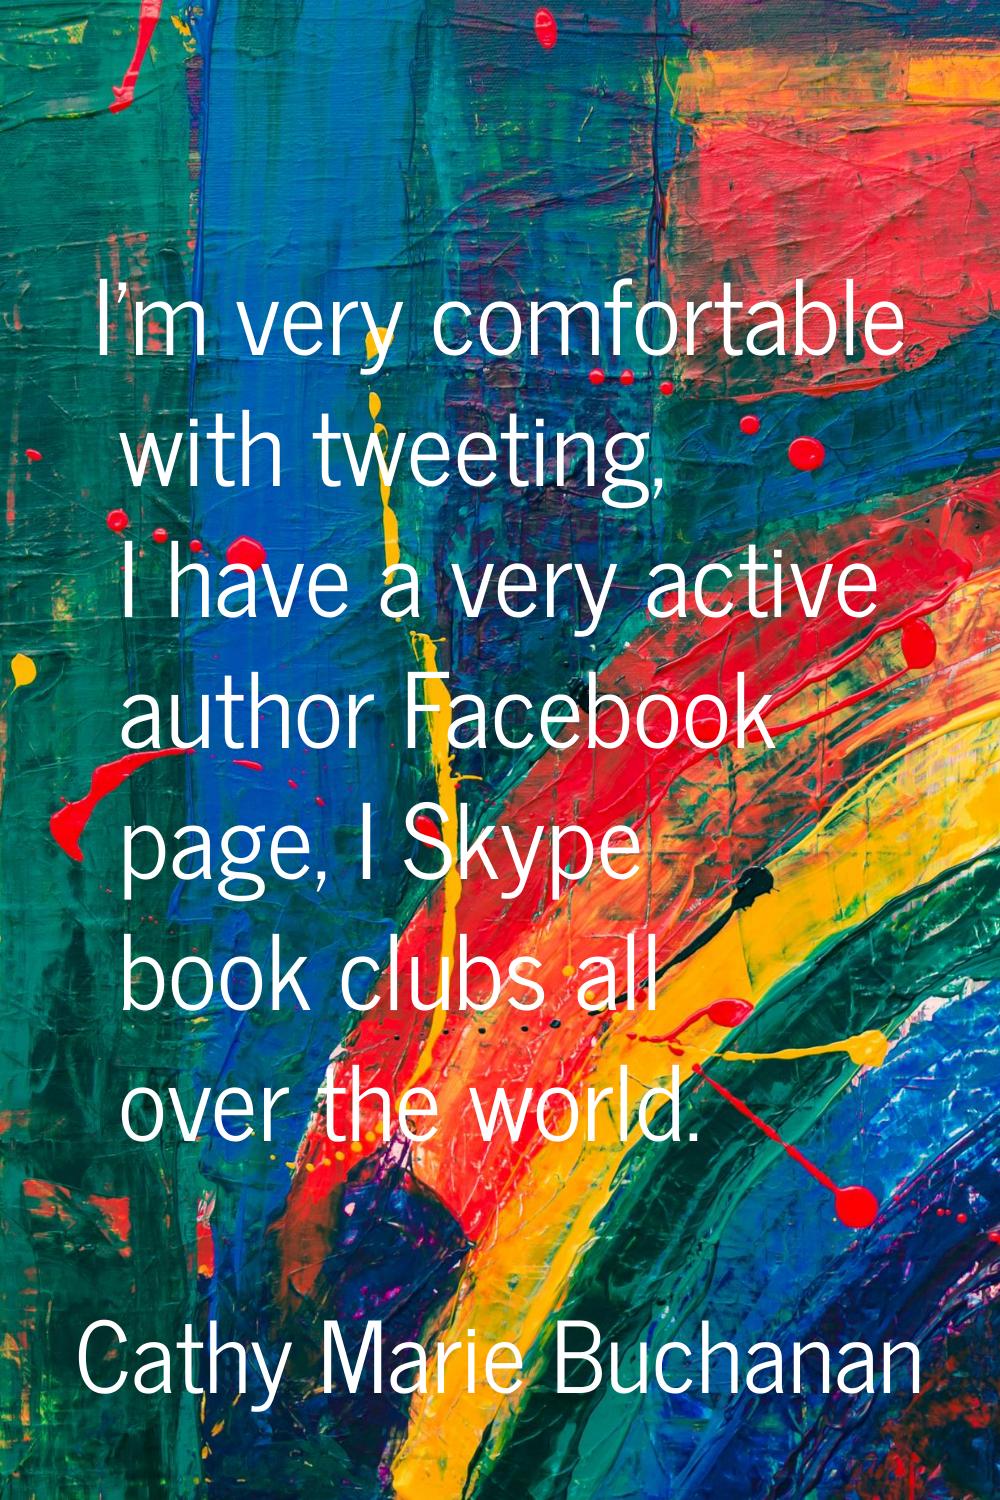 I'm very comfortable with tweeting, I have a very active author Facebook page, I Skype book clubs a